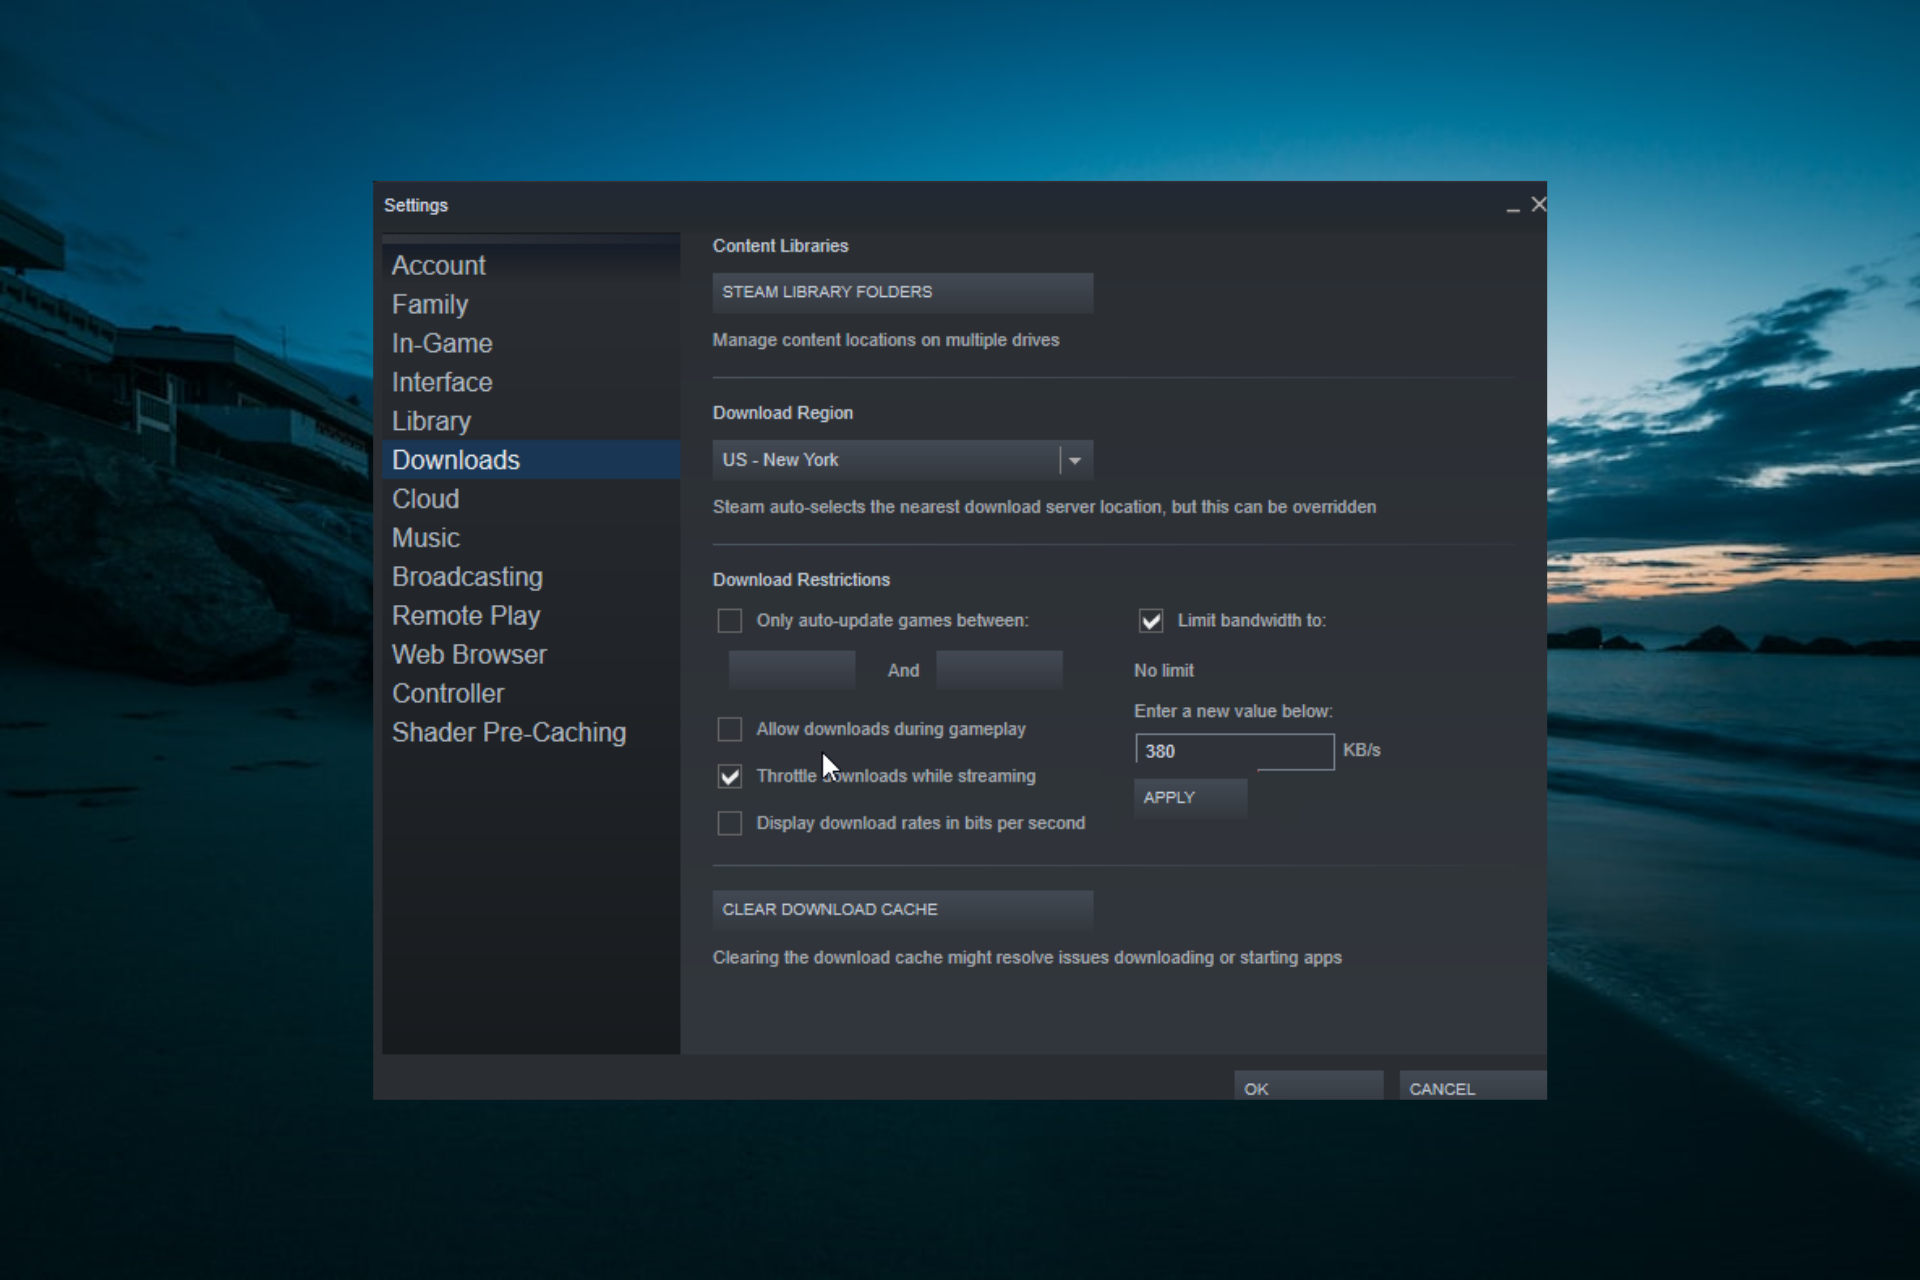 Steam Download Goes On and Off: 4 Methods to Fix It